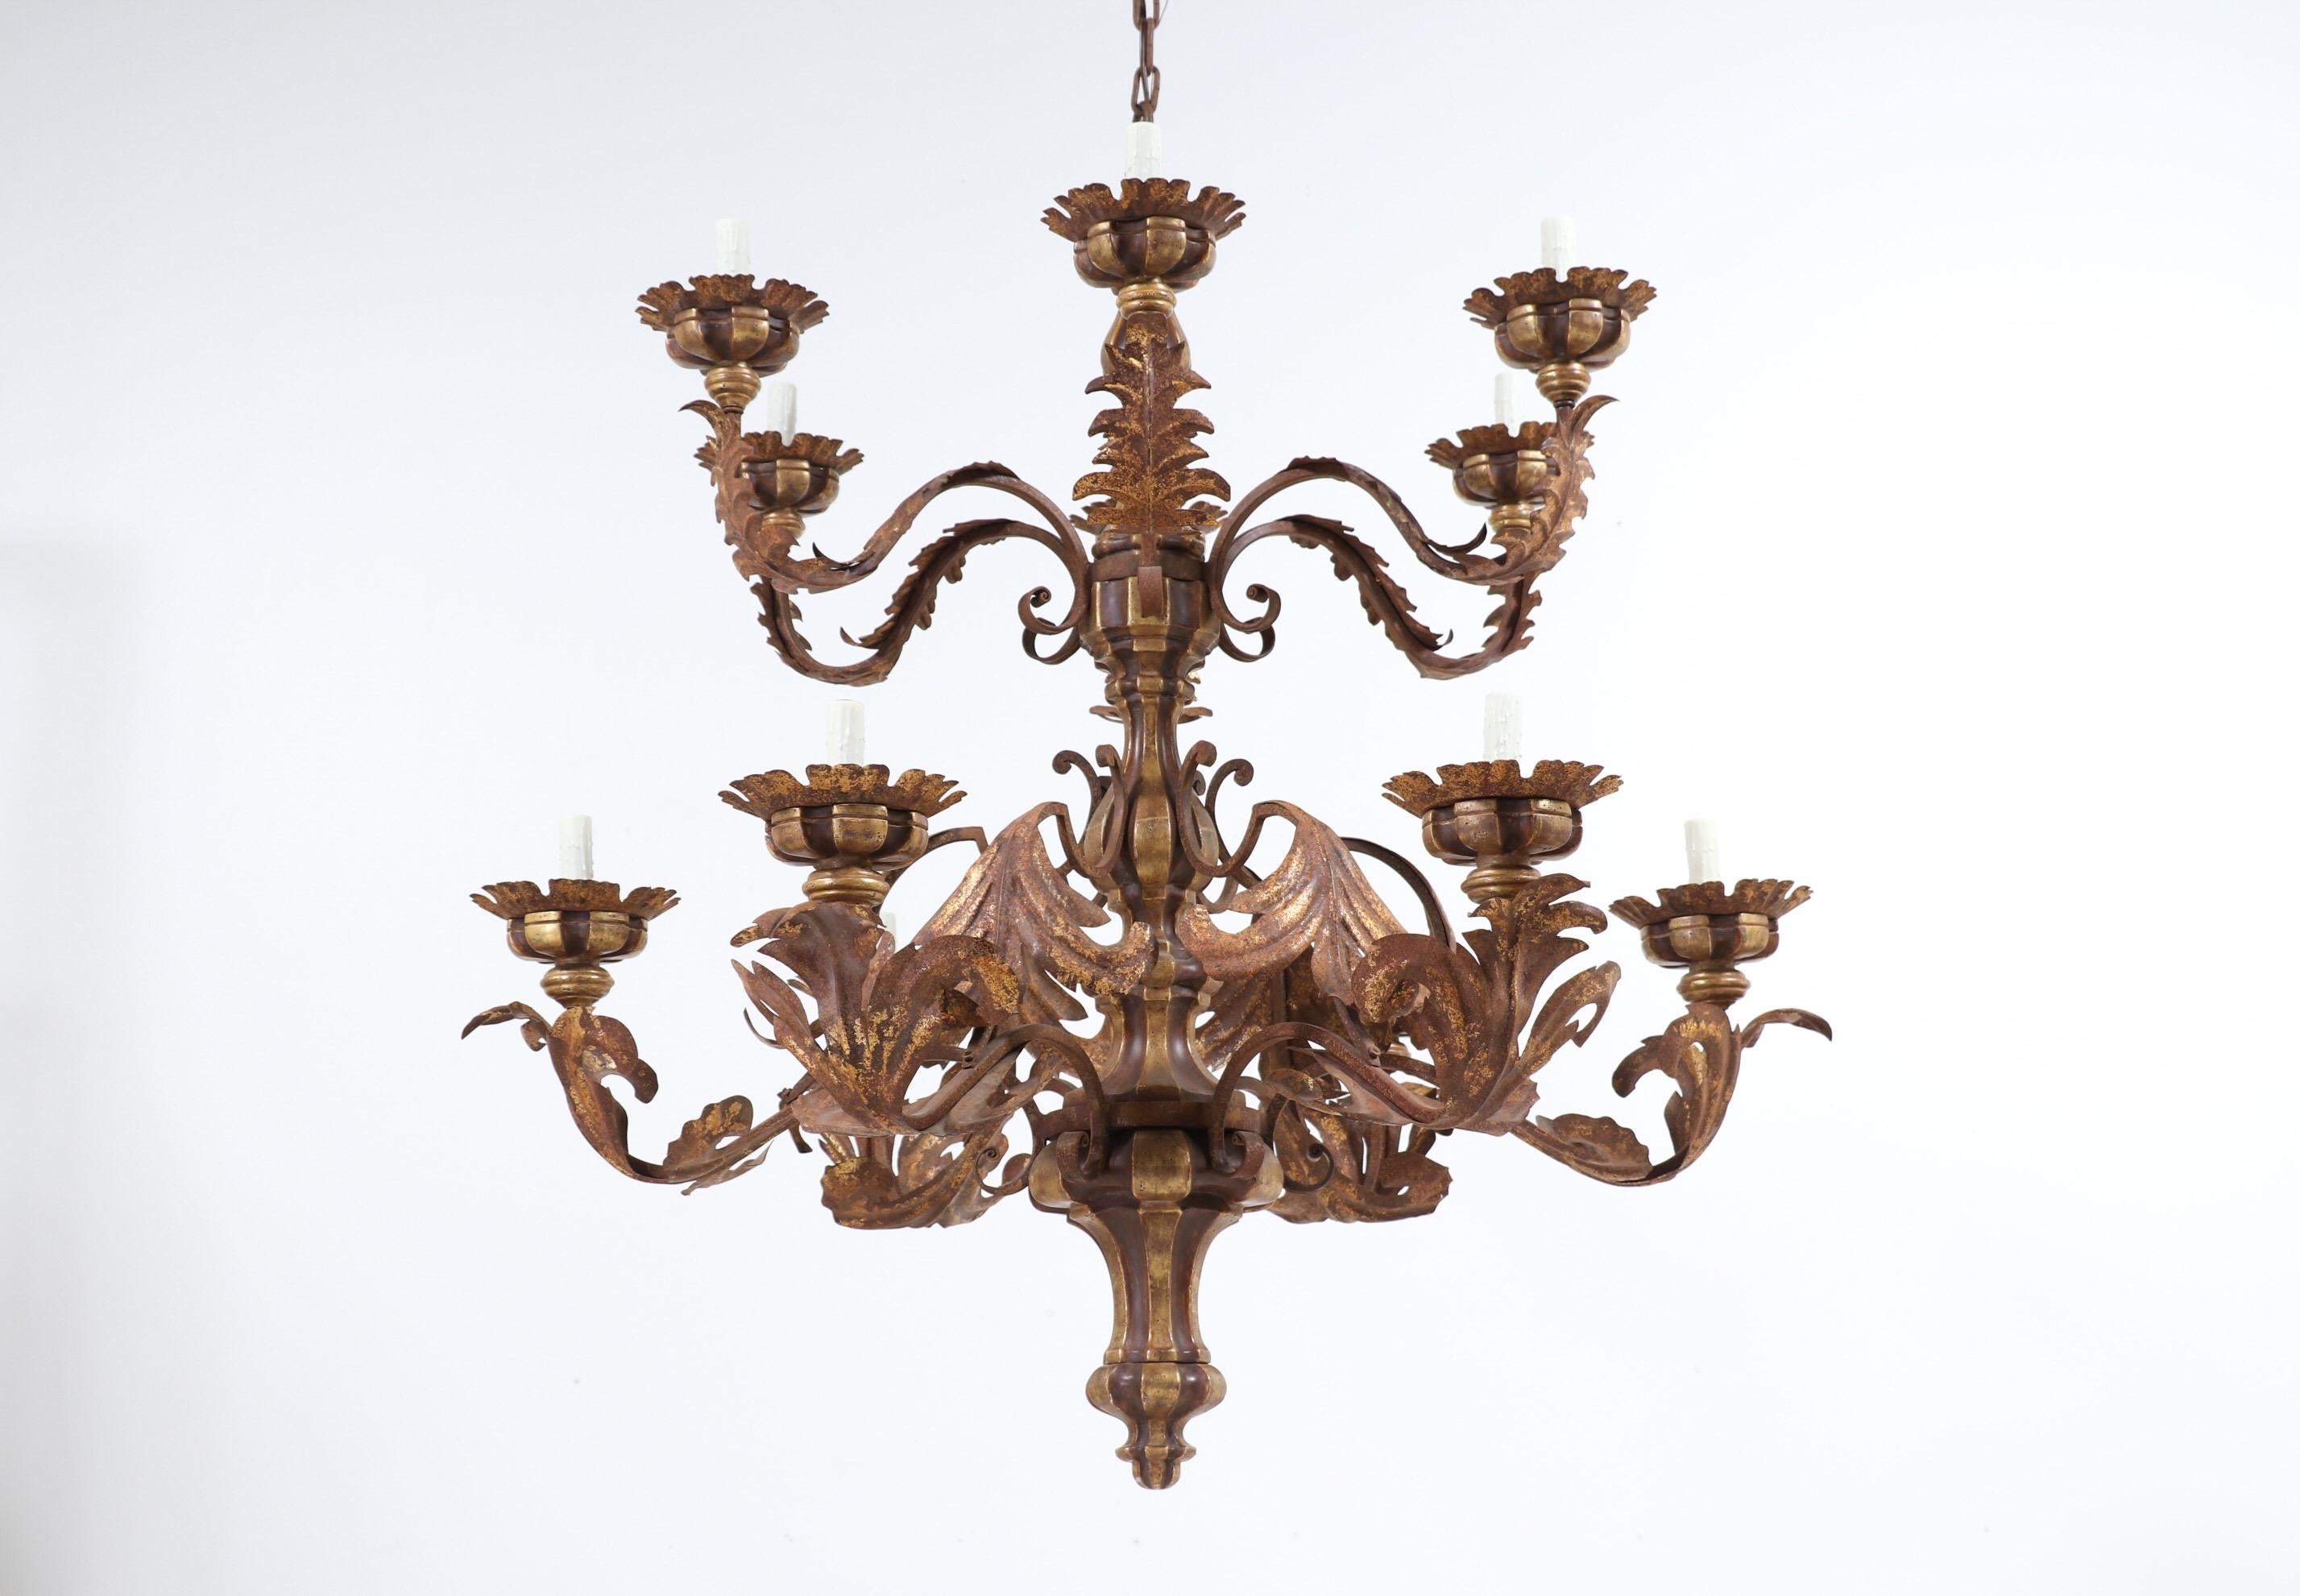 One of a pair available. Price is per item.

Monumental, Italian-style painted and parcel-gilt carved wood “Seasons” chandelier by Paul Ferrante. 

This impressive, 2-tier chandelier consists of carved, gilded-wood components and 12 leafy iron arms